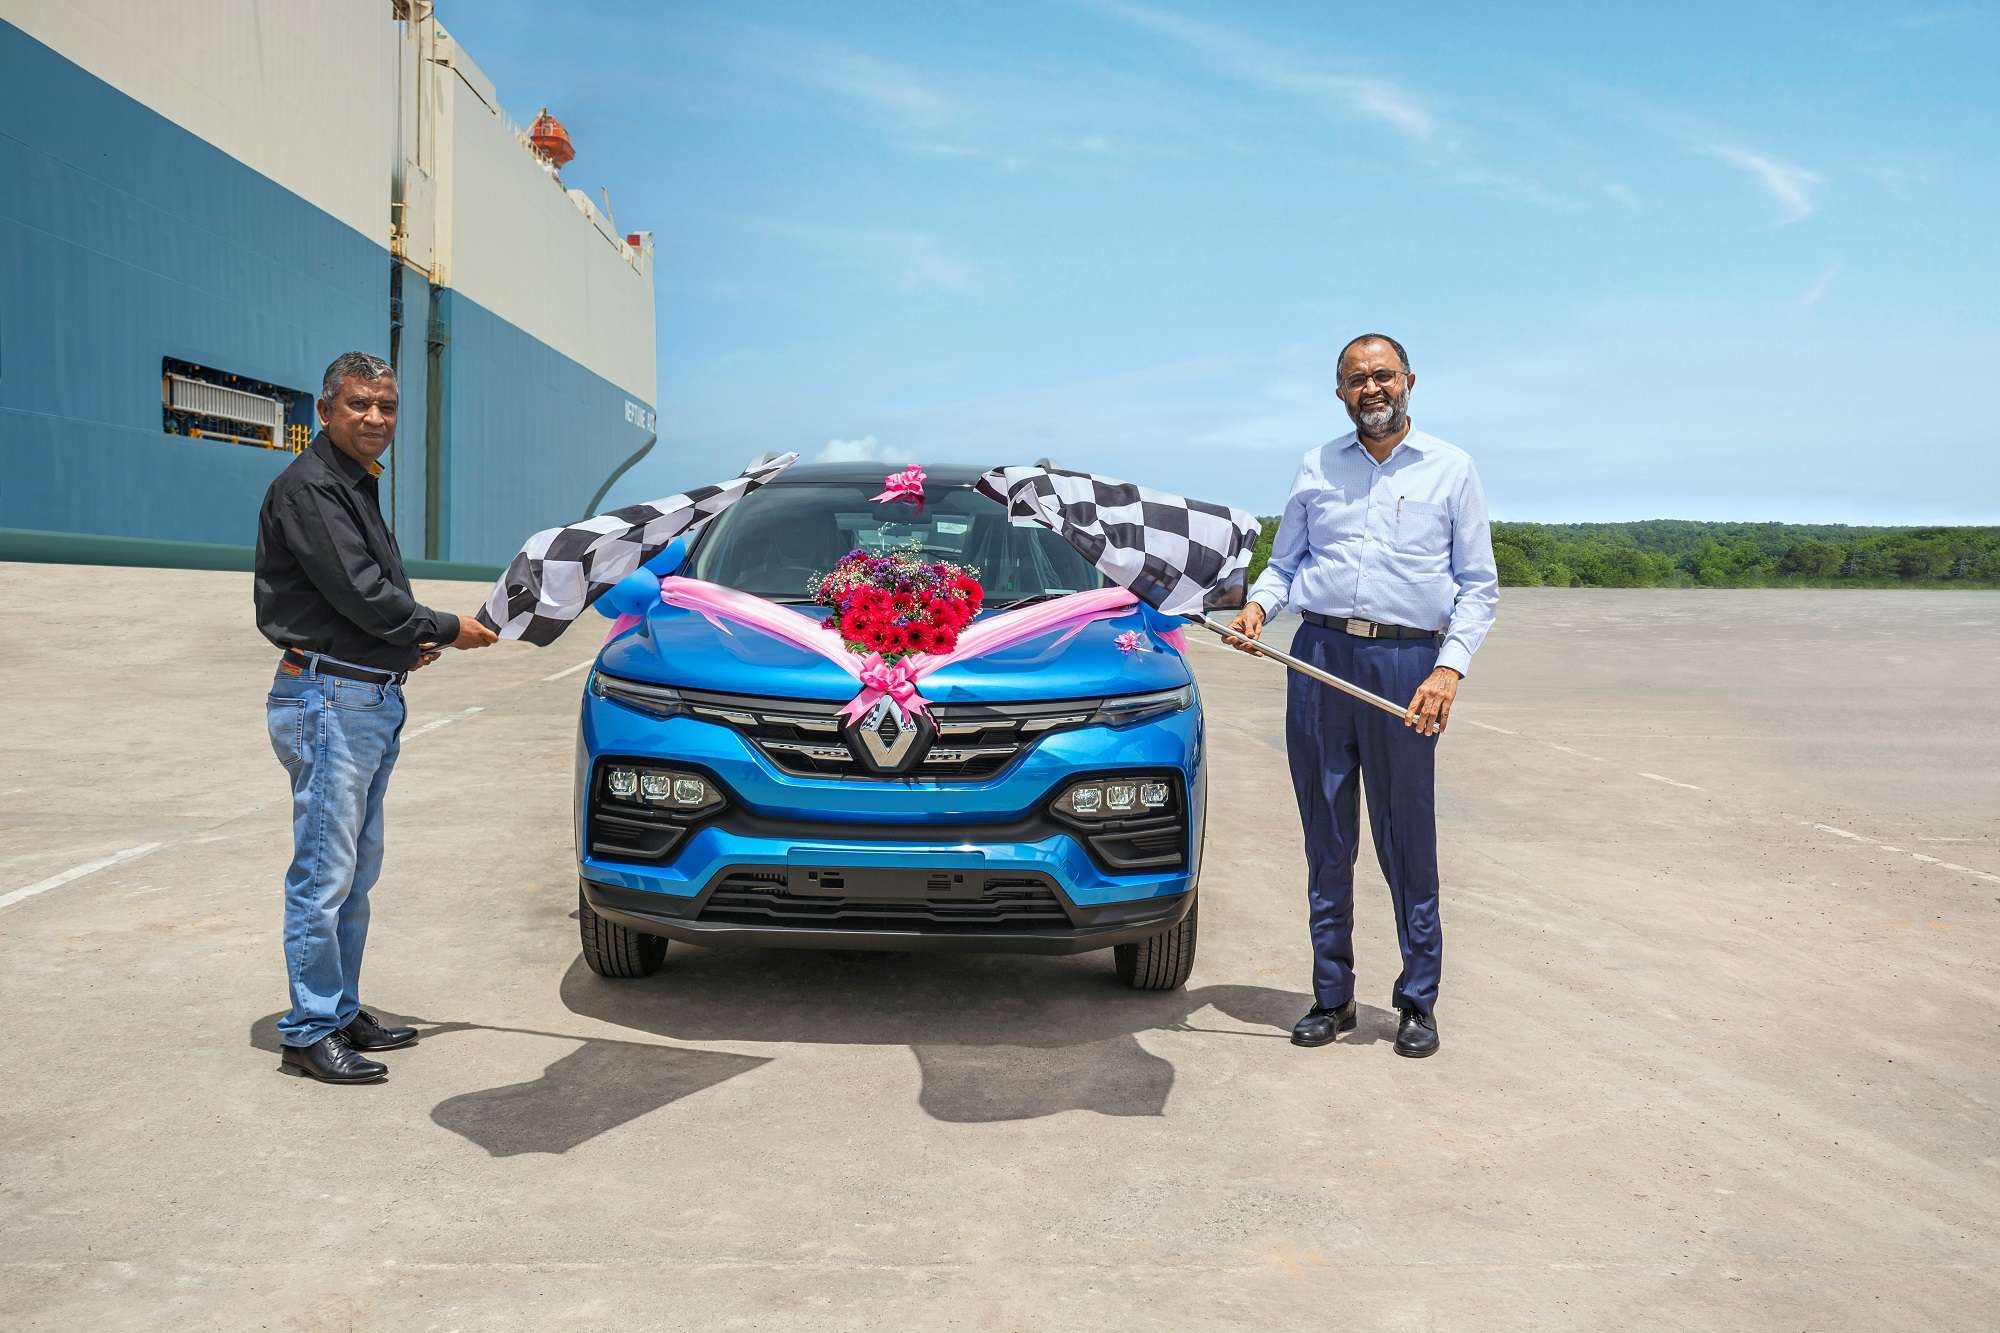 Renault Kiger South Africa Exports Renault India Begins Exports Of Kiger To South Africa Auto News Et Auto